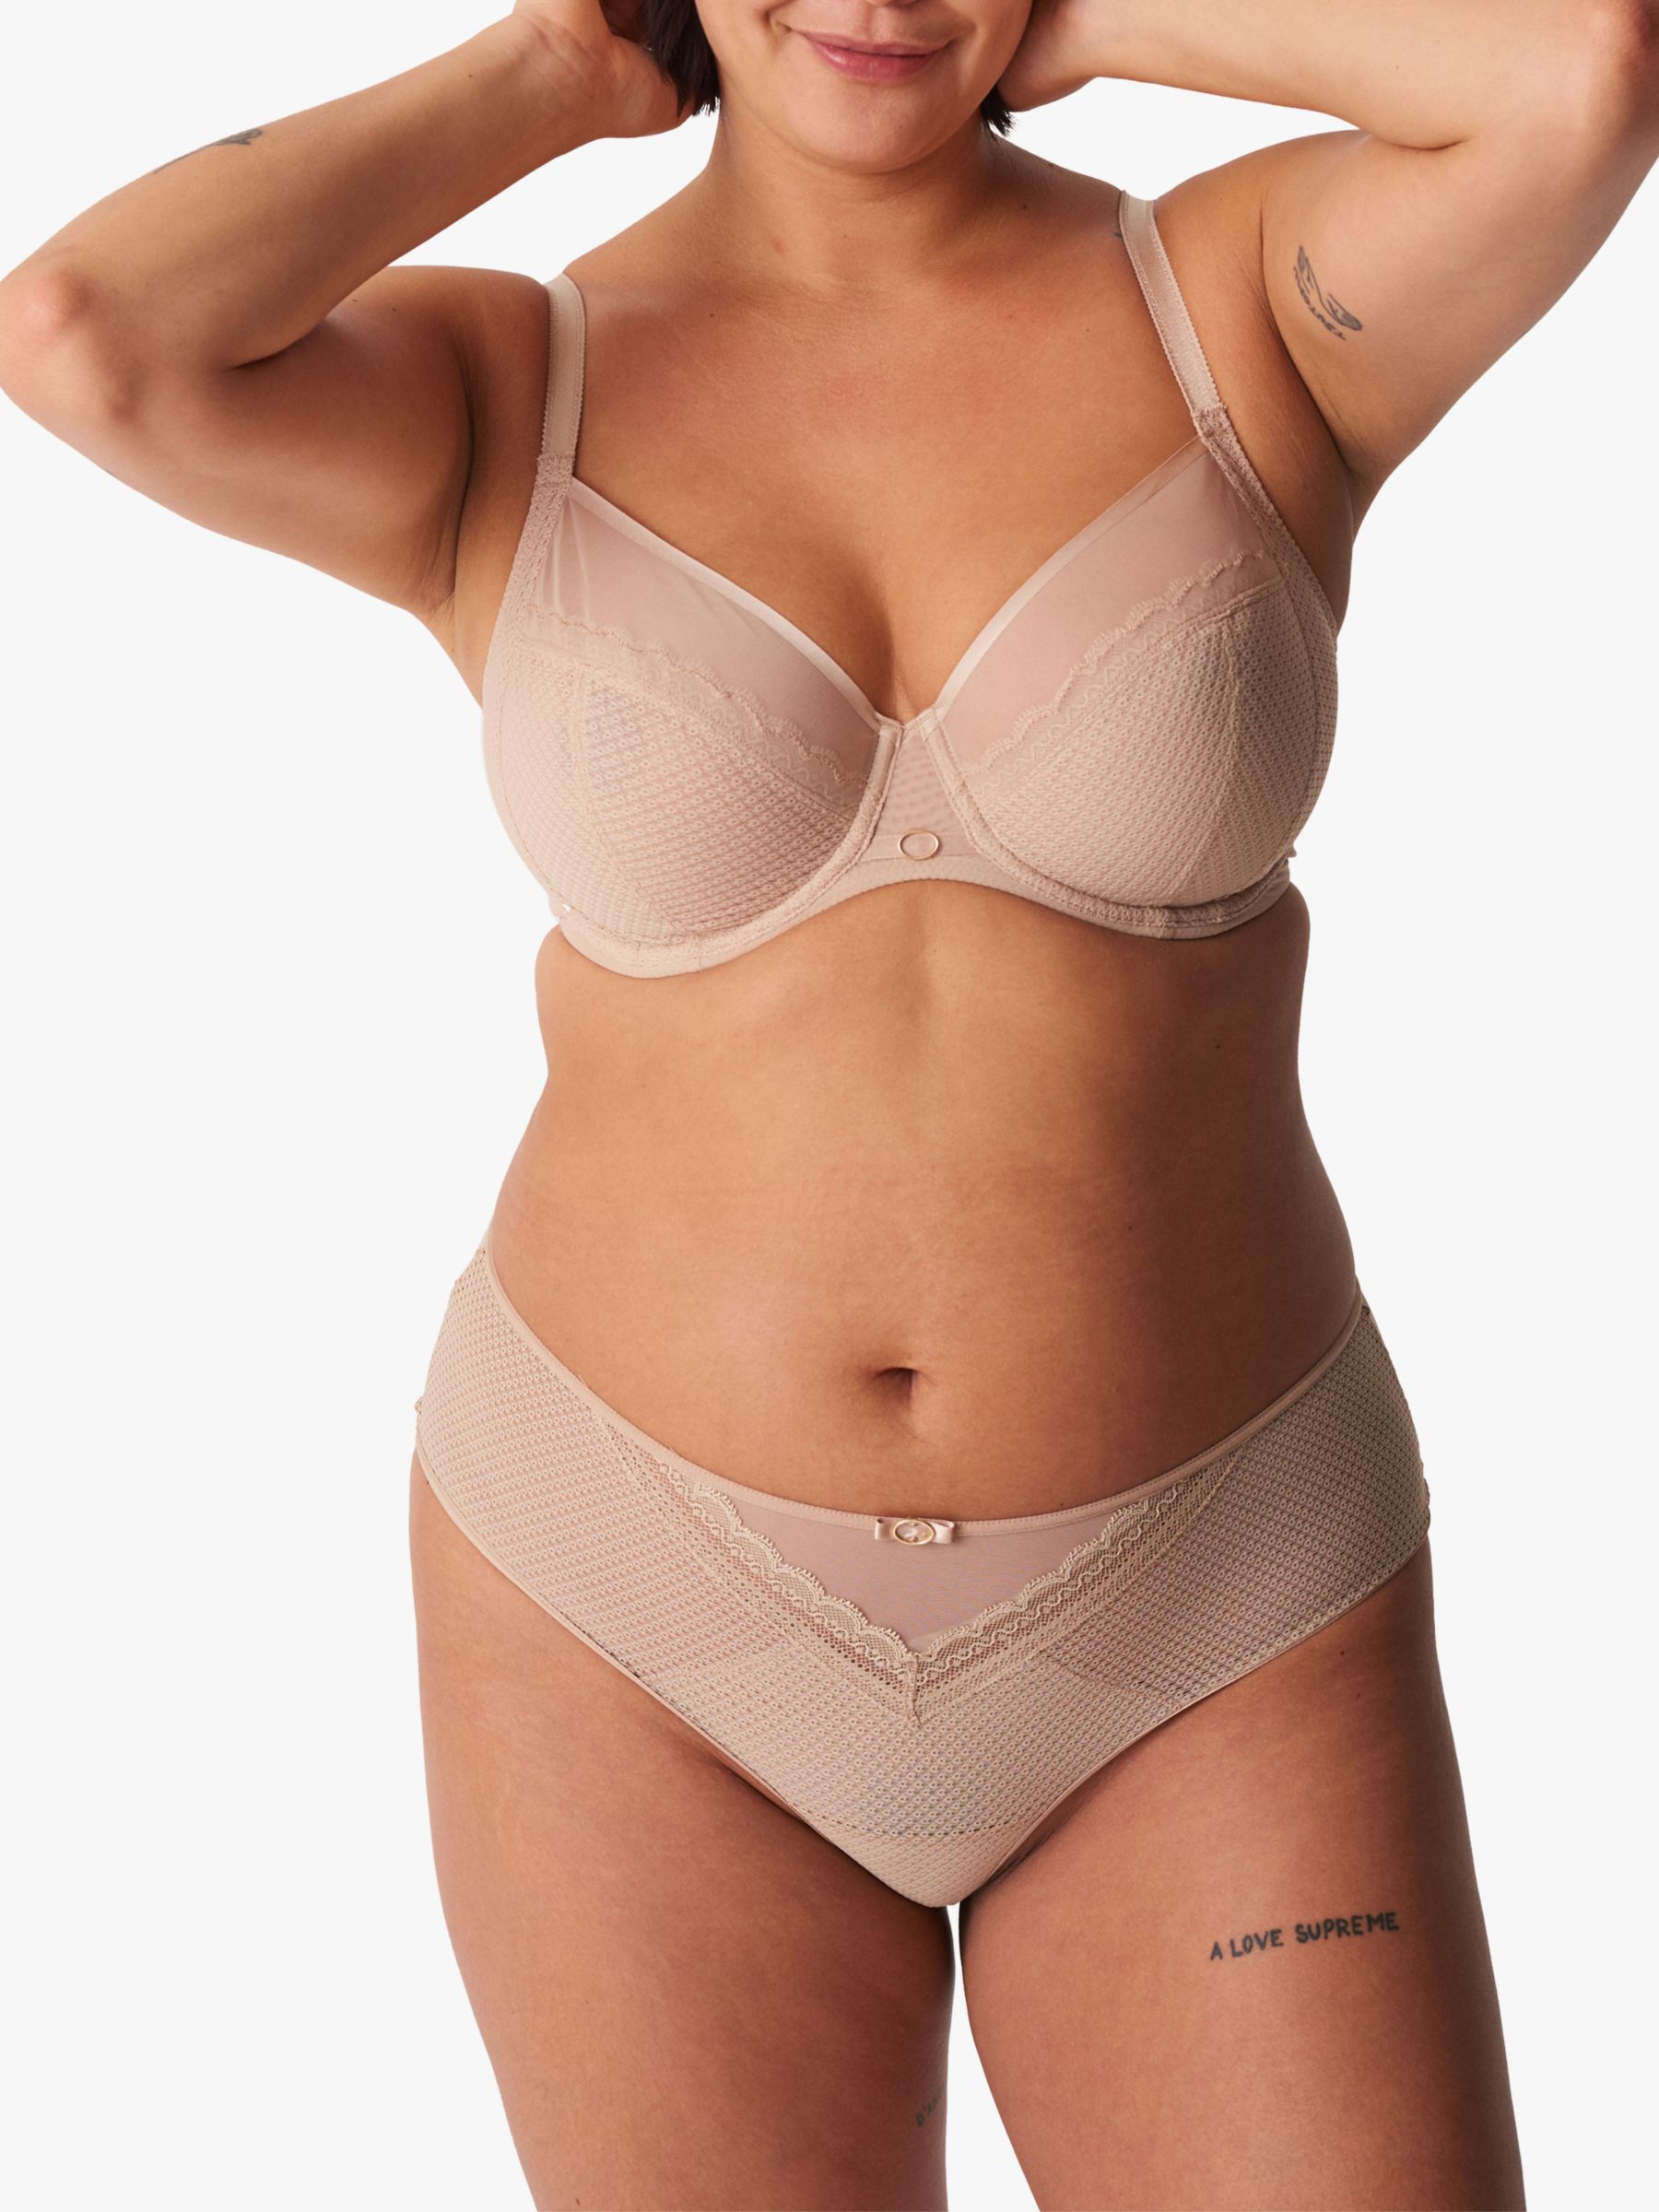 Plus Size Bras 38E, Bras for Large Breasts